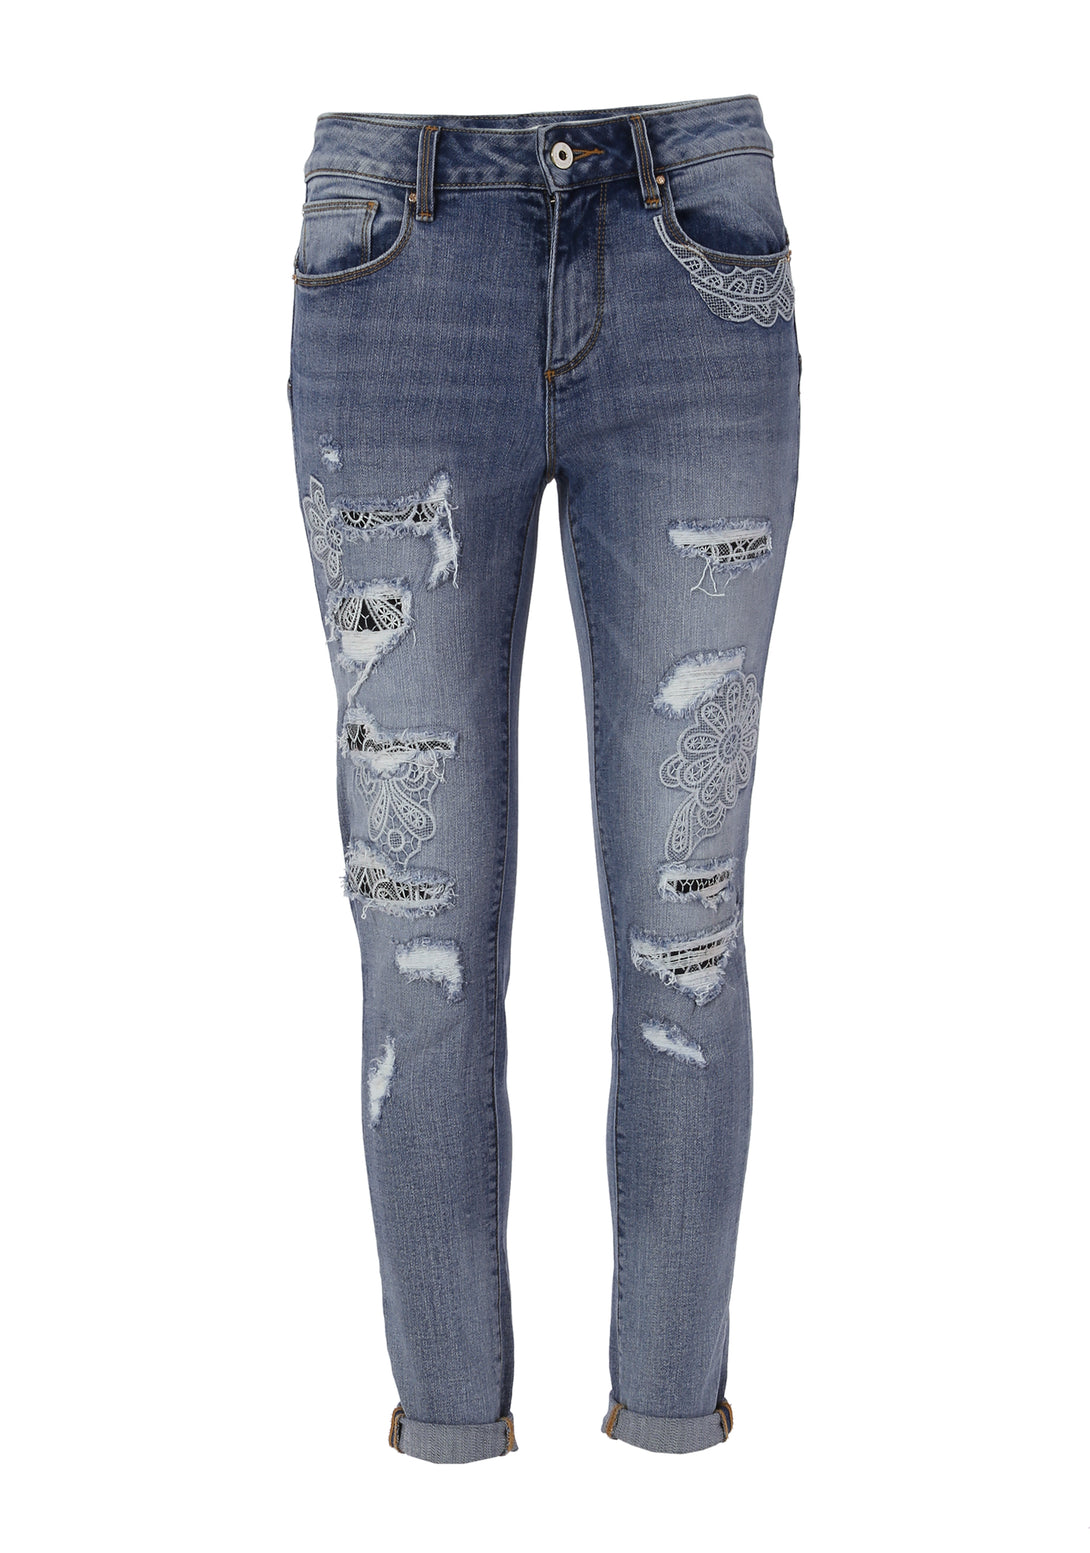 Jeans skinny fit with push-up effect made in denim with bleached wash